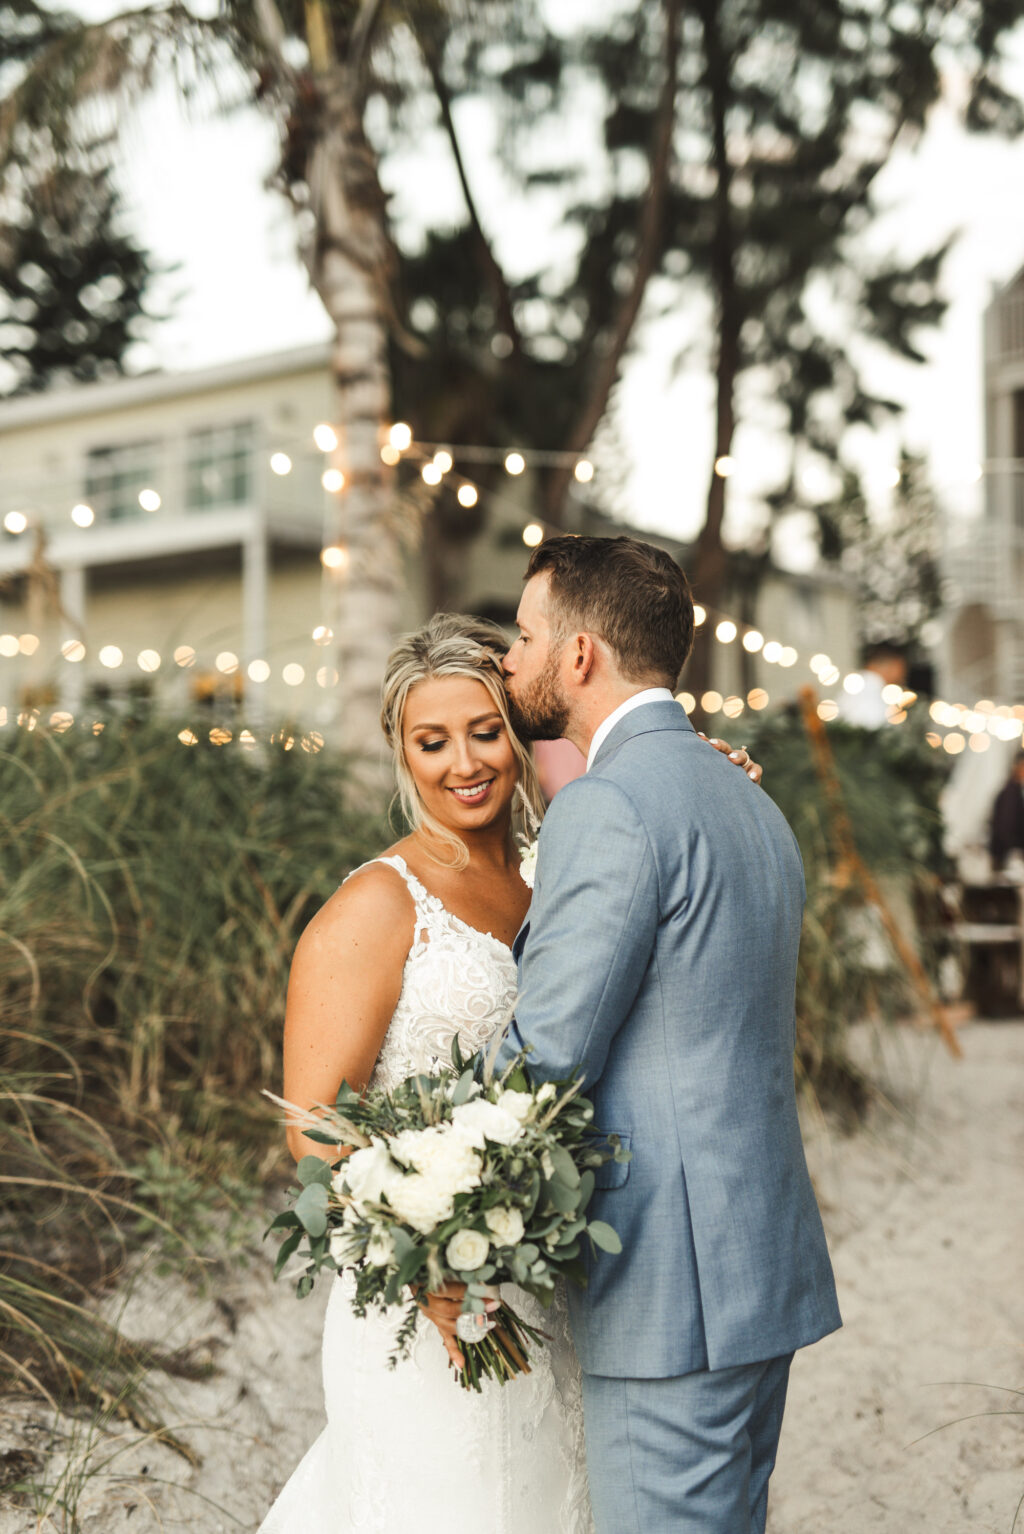 Intimate Bride and Groom Wedding Portrait | Tampa Bay Photographer Videographer J&S Media | Planner Kelci Leigh Events